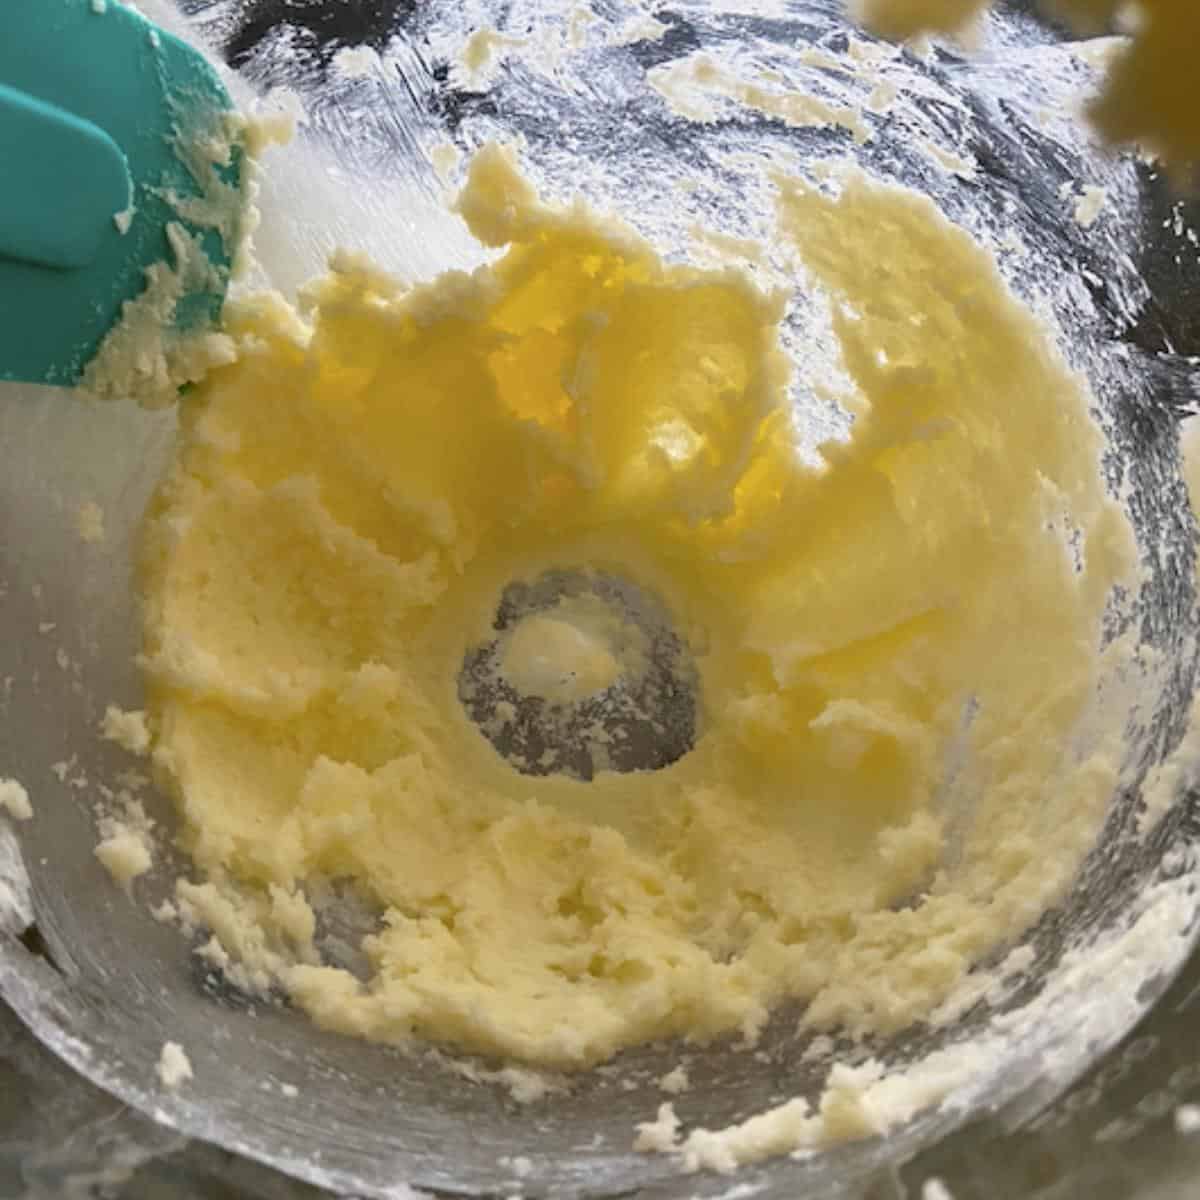 Sugar and butter creamed together in glass bowl.